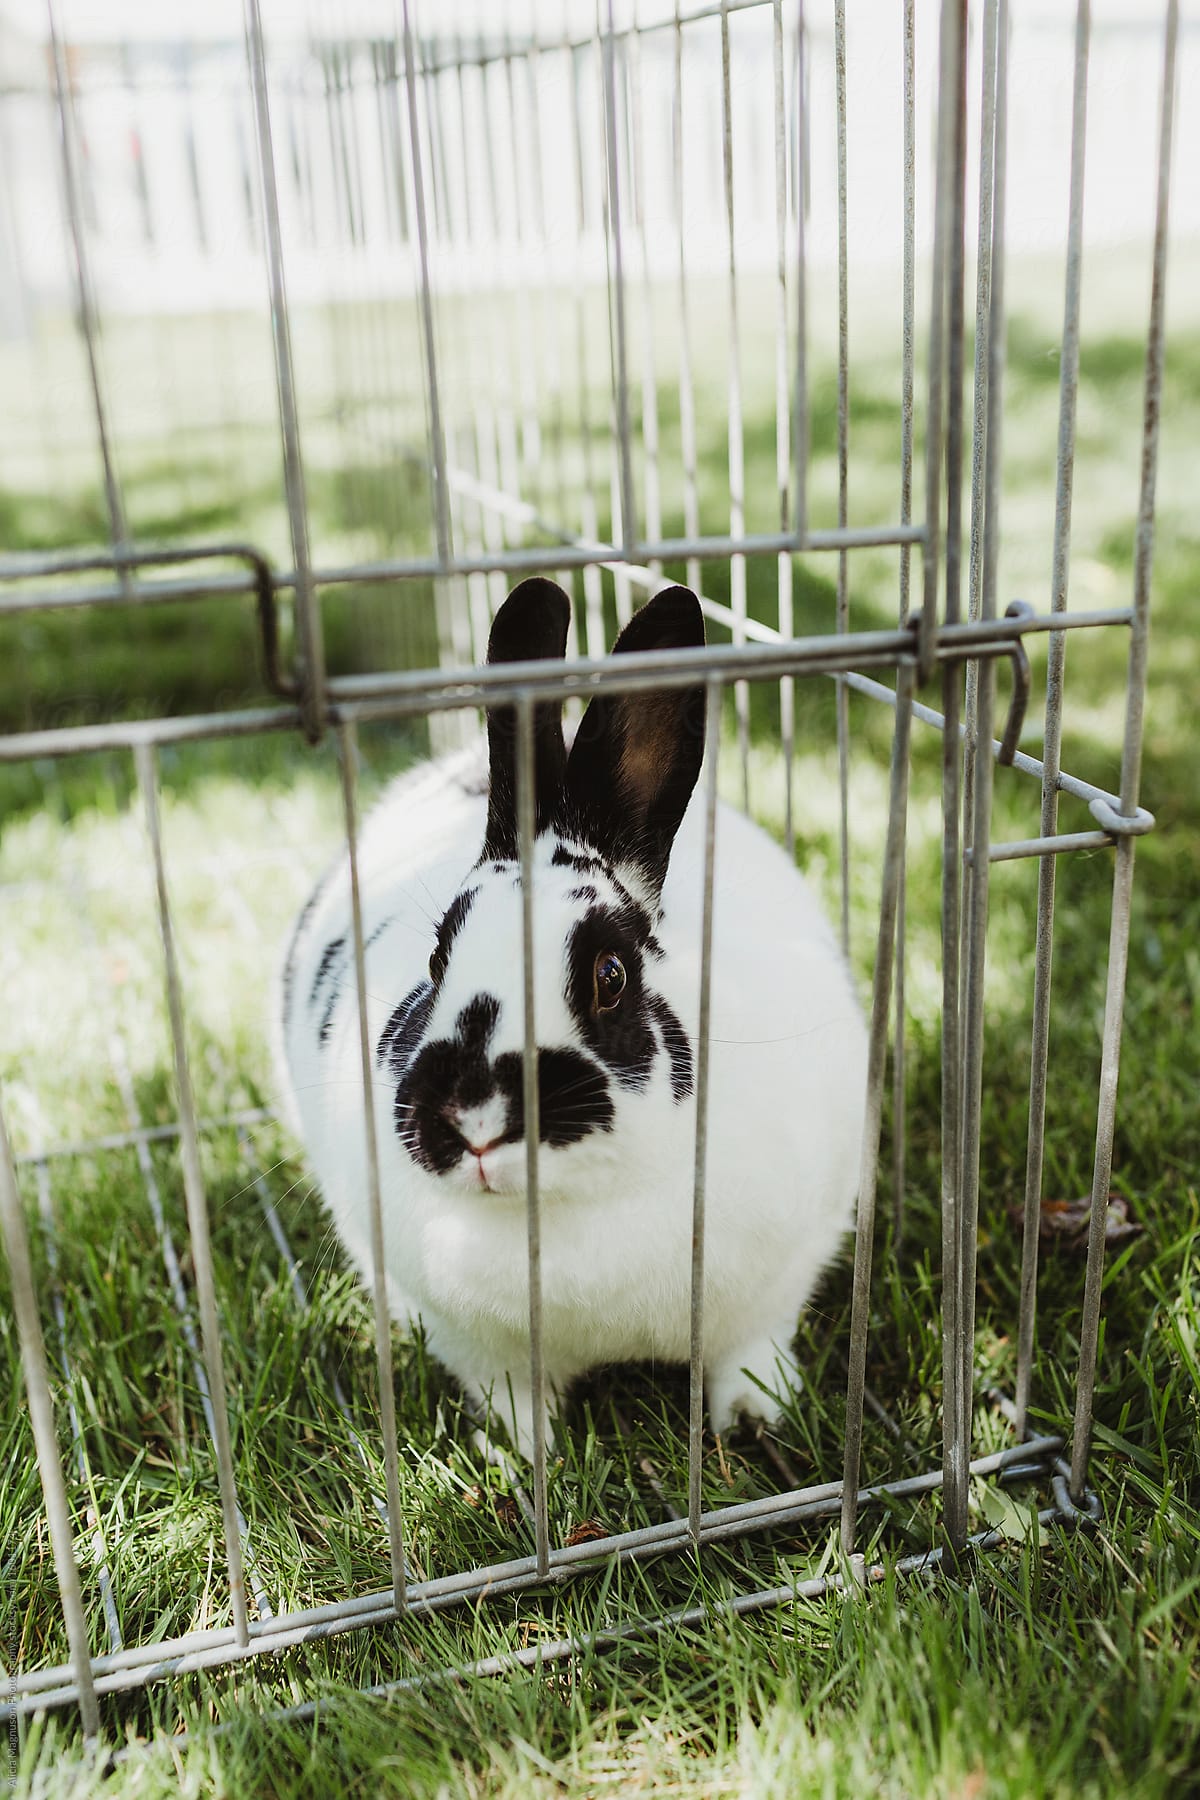 Caged Black and White Pet Rabbit in Yard